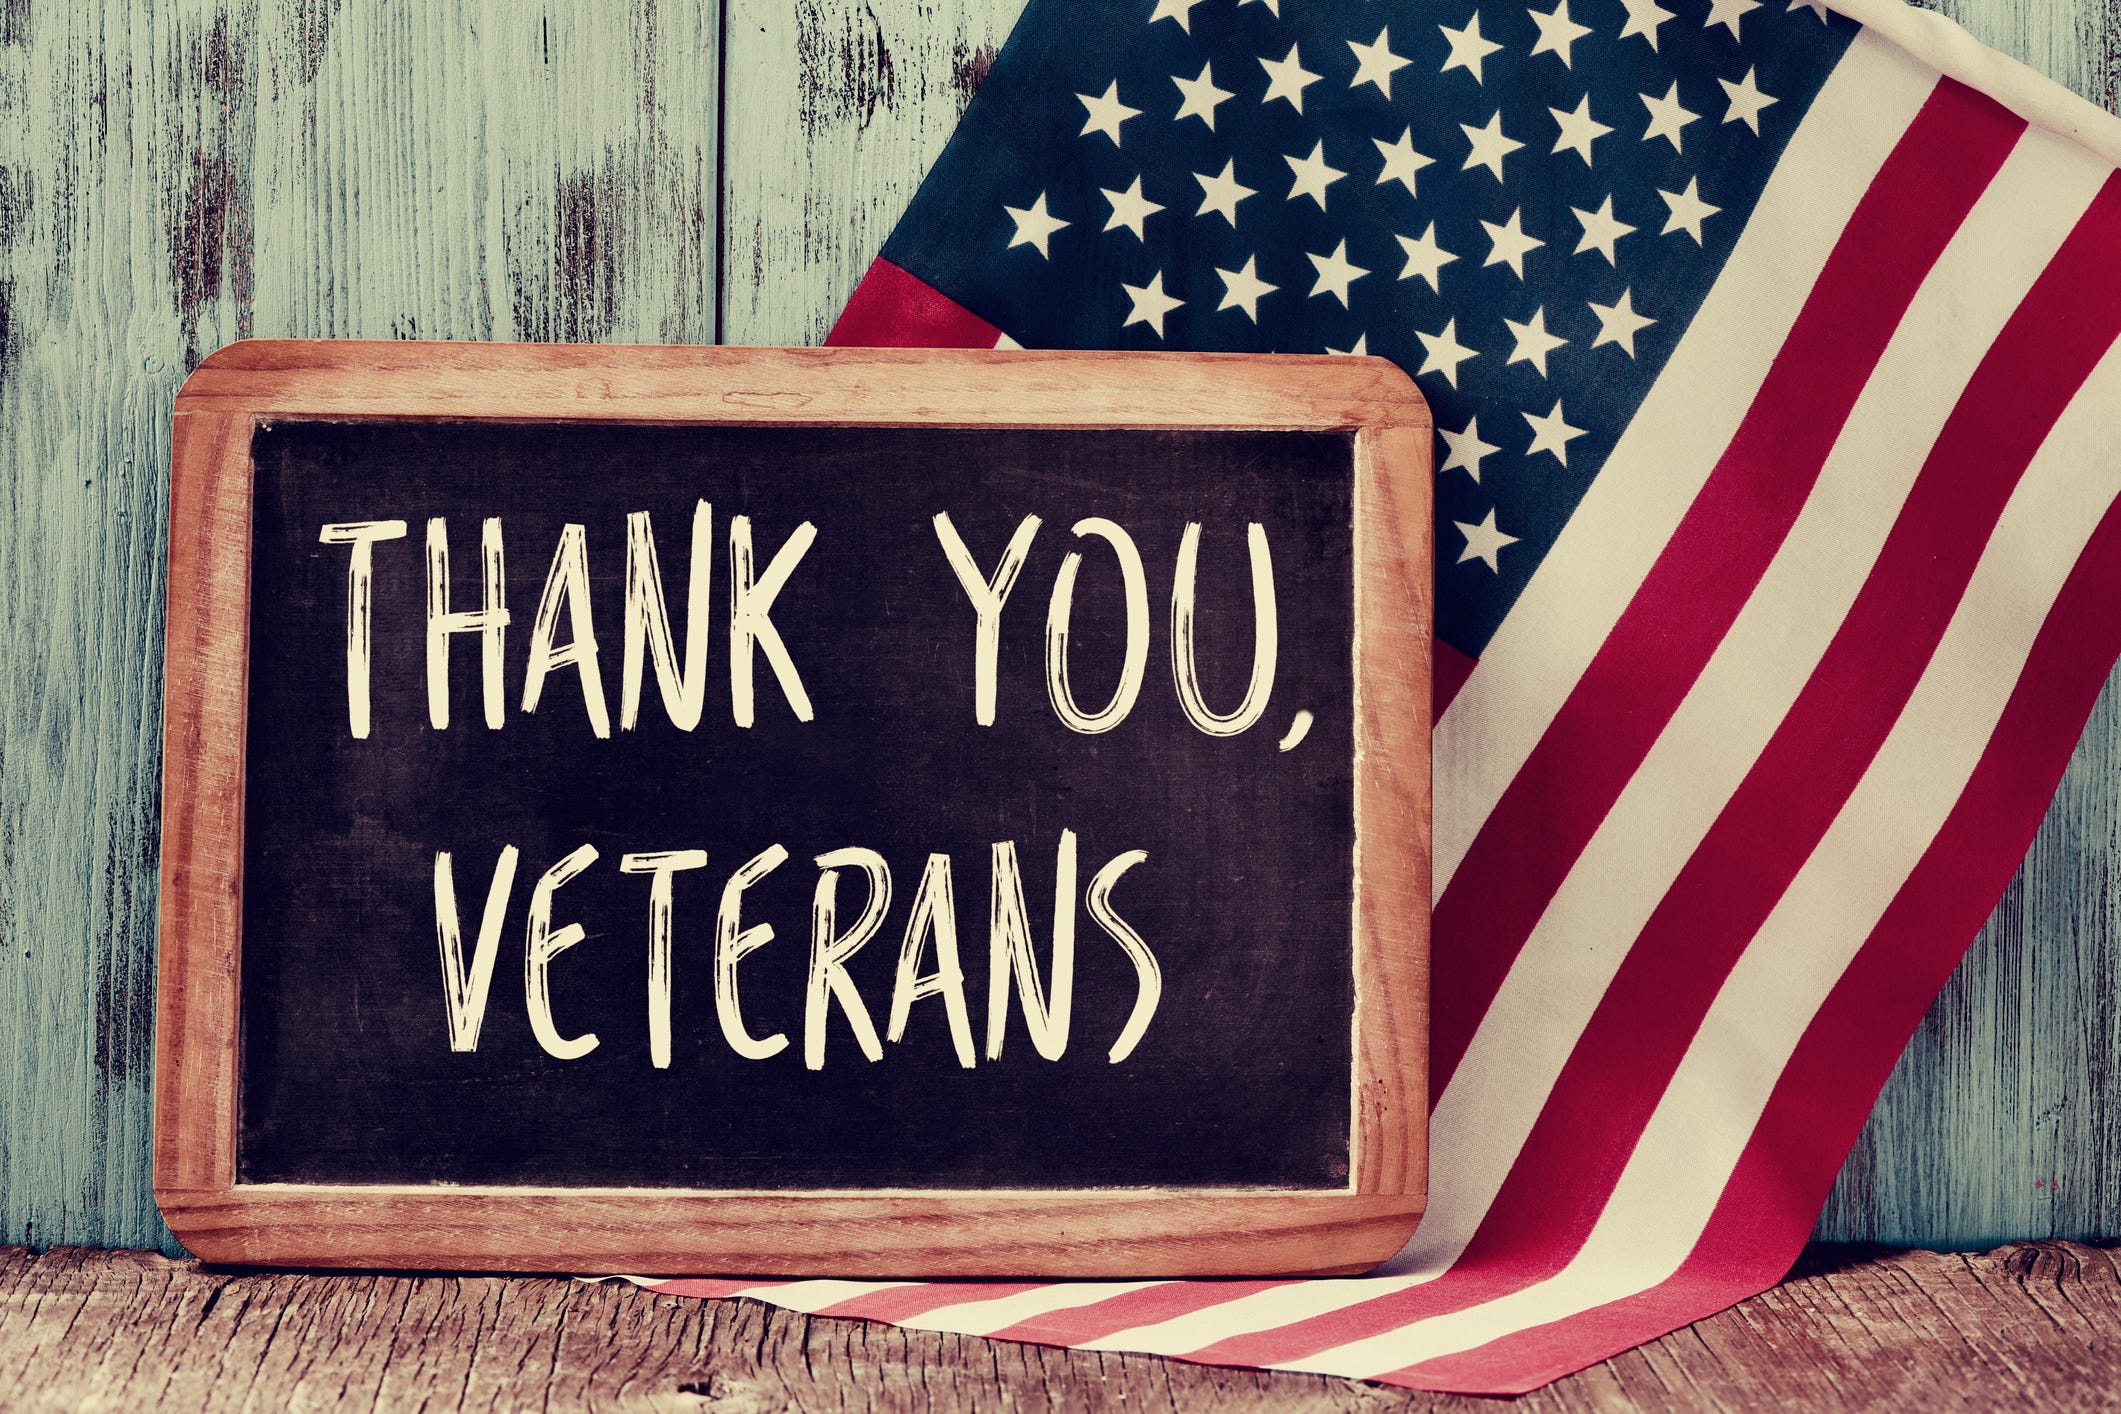 Where can veterans get free food on Veterans Day in Rochester? Salvatore's, Bill Gray's and more